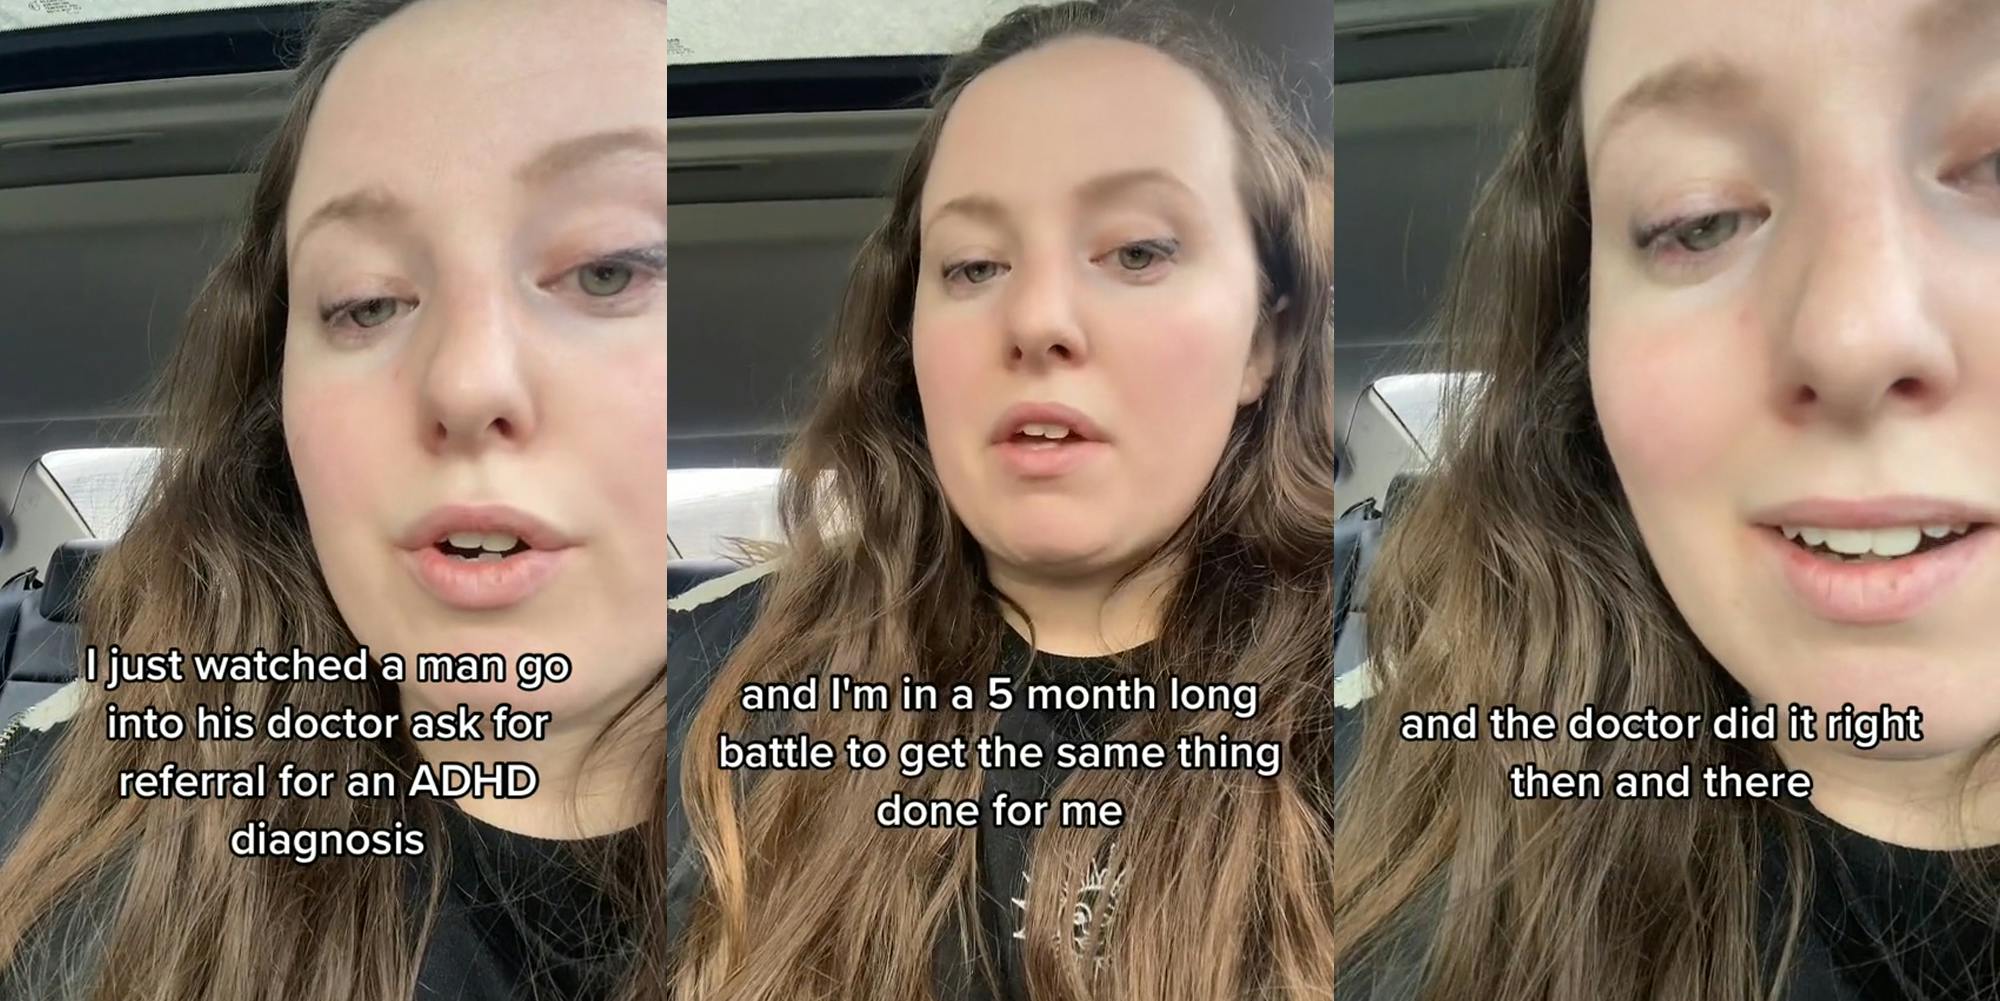 woman speaking in car with caption "I just watched a man go into his doctor ask for referral for an ADHD diagnosis" (l) woman speaking in car with caption "and I'm in a 5 month long battle to get the samw thing done for me" (c) woman speaking n car with caption "and the doctor did it right then and there" (r)